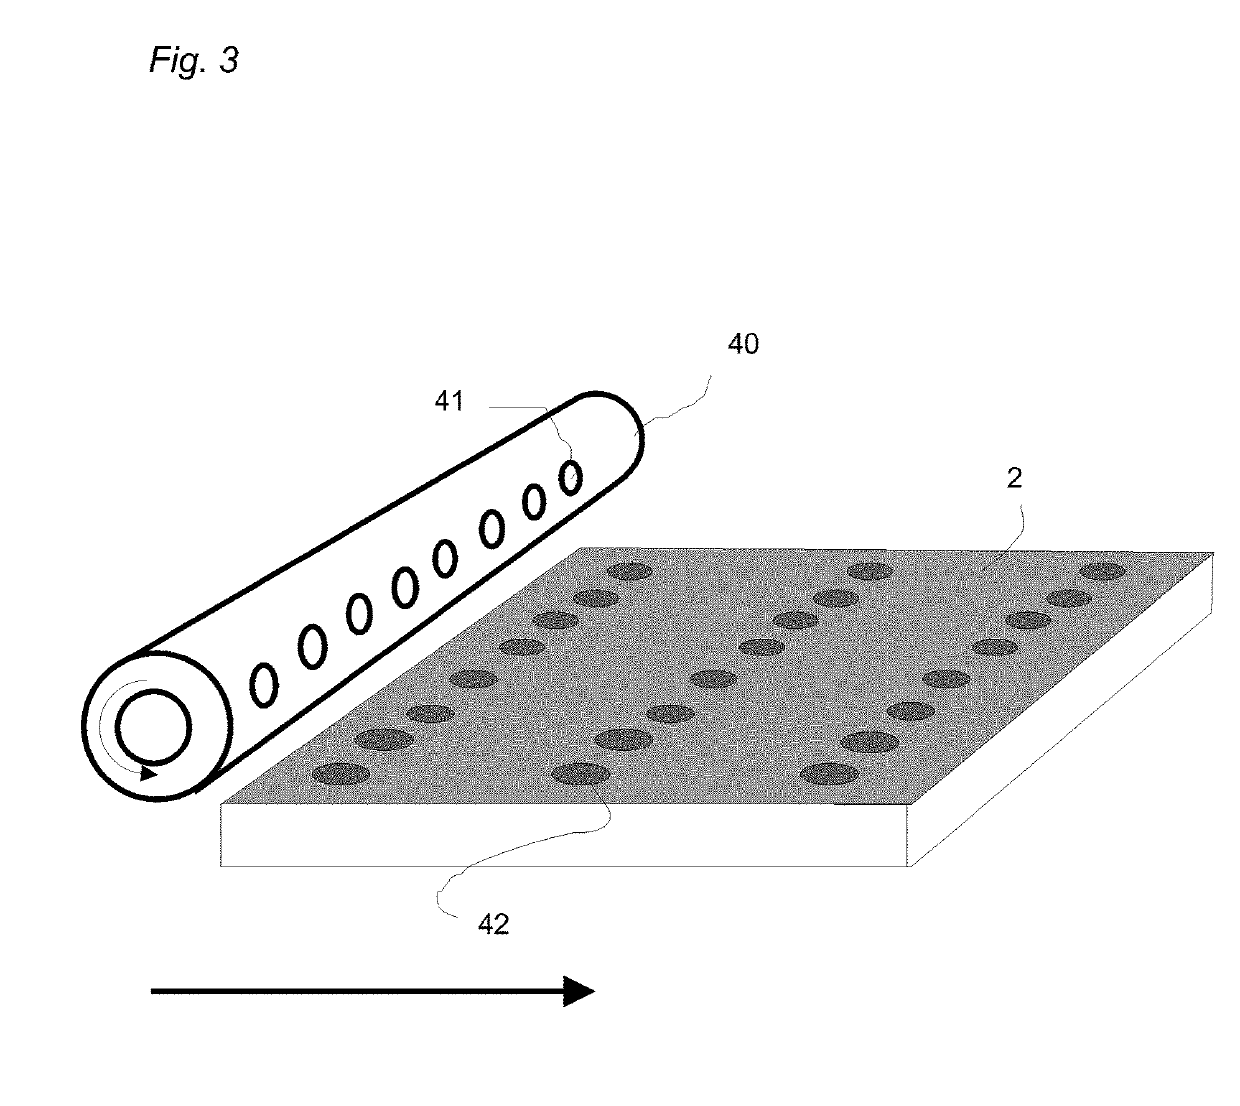 Method of manufacturing a panel